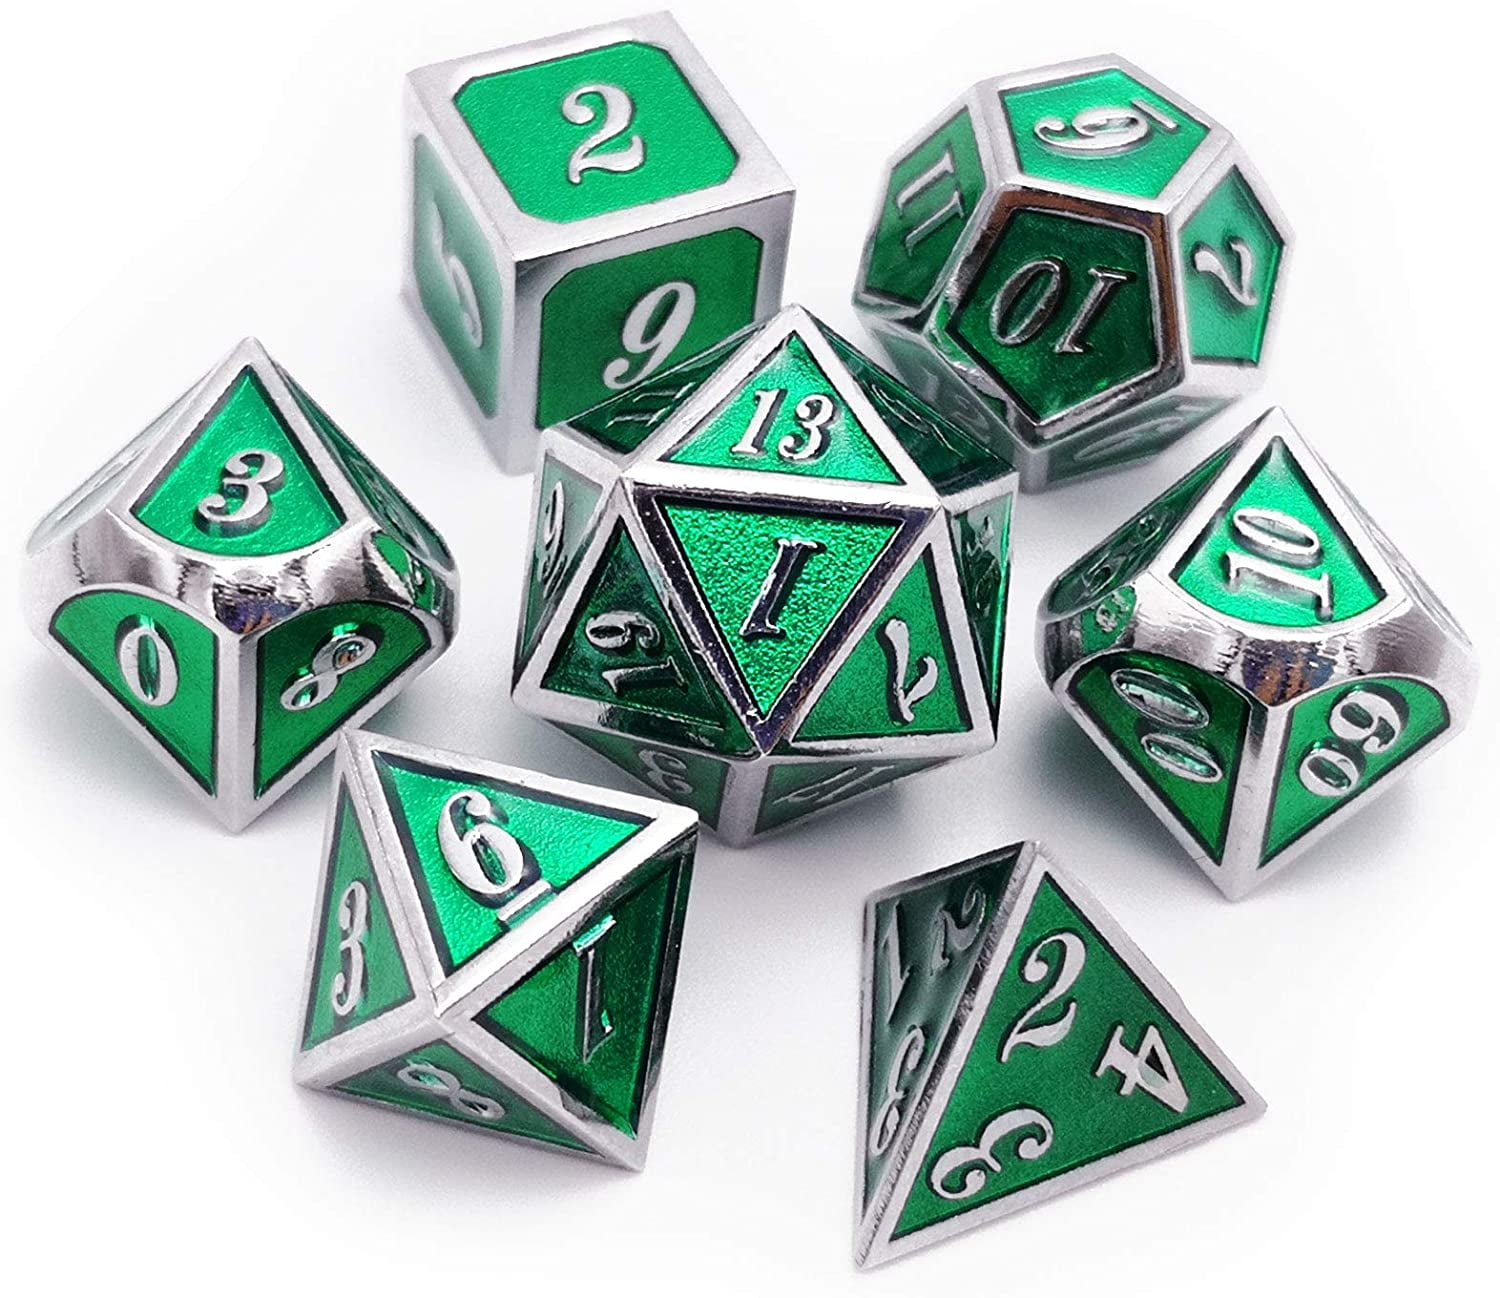 Details about   7Pcs Polyhedral Metal Dice for RPG Role Playing Tabletop Game Black Edge Green